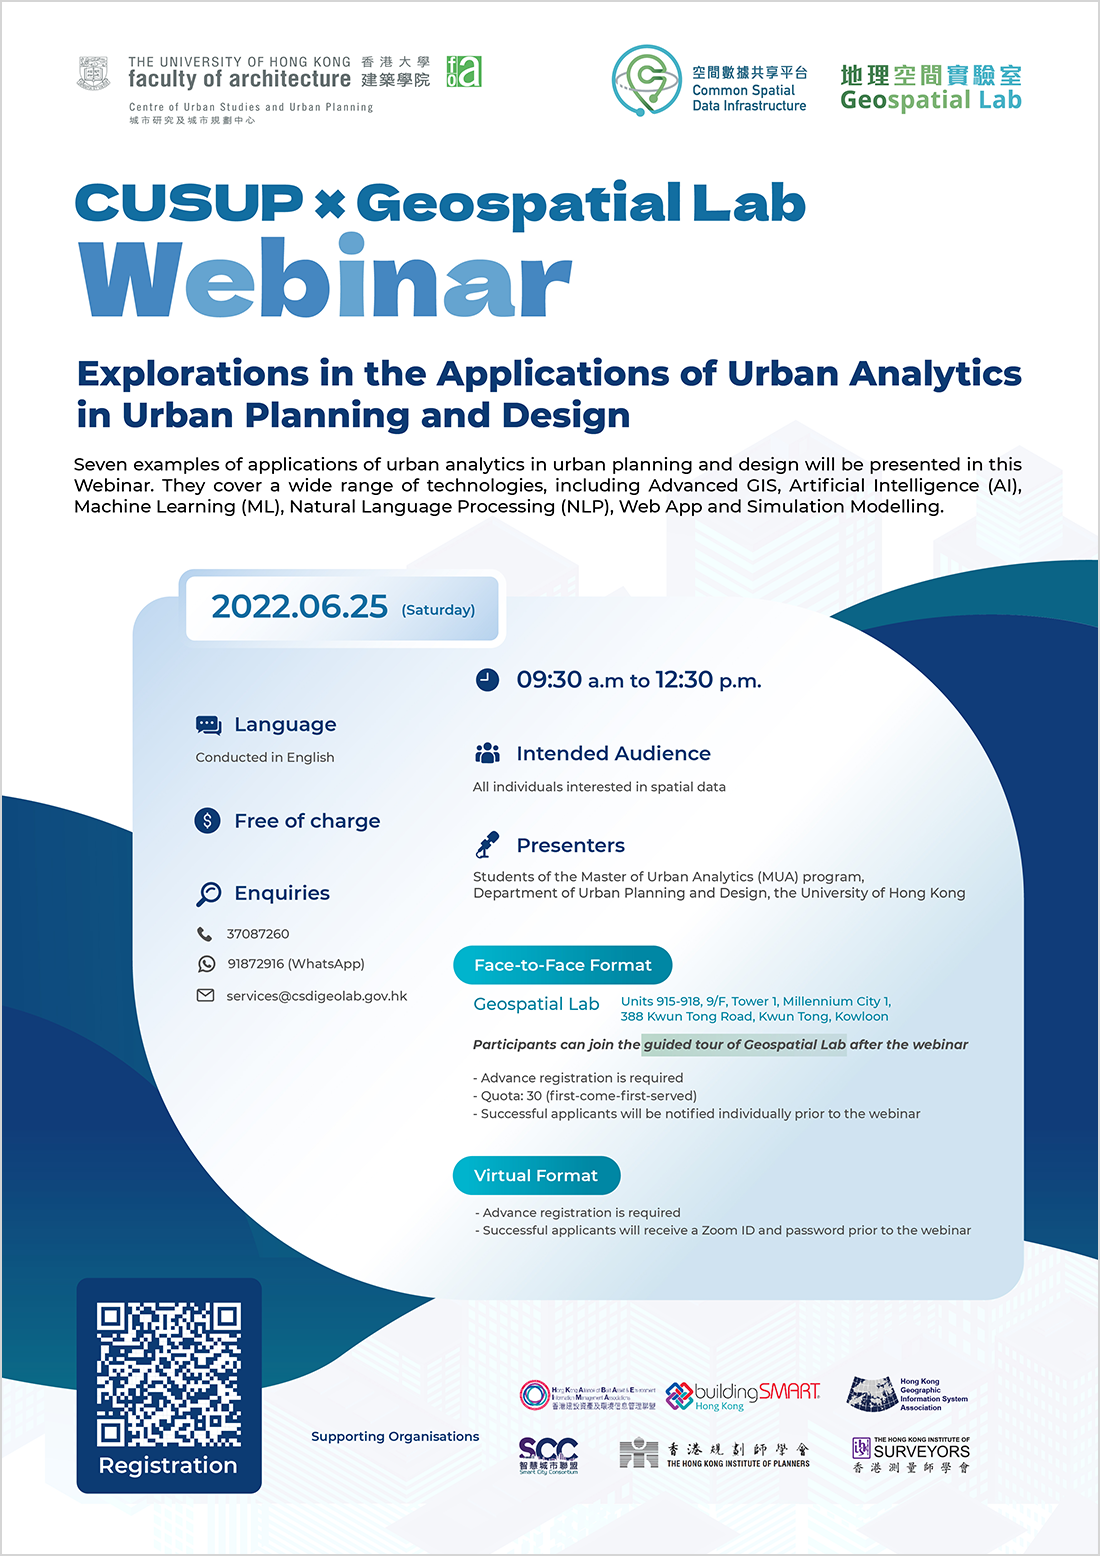 CUSUP X Geospatial Lab Webinar - Explorations in the Applications of Urban Analytics in Urban Planning and Design